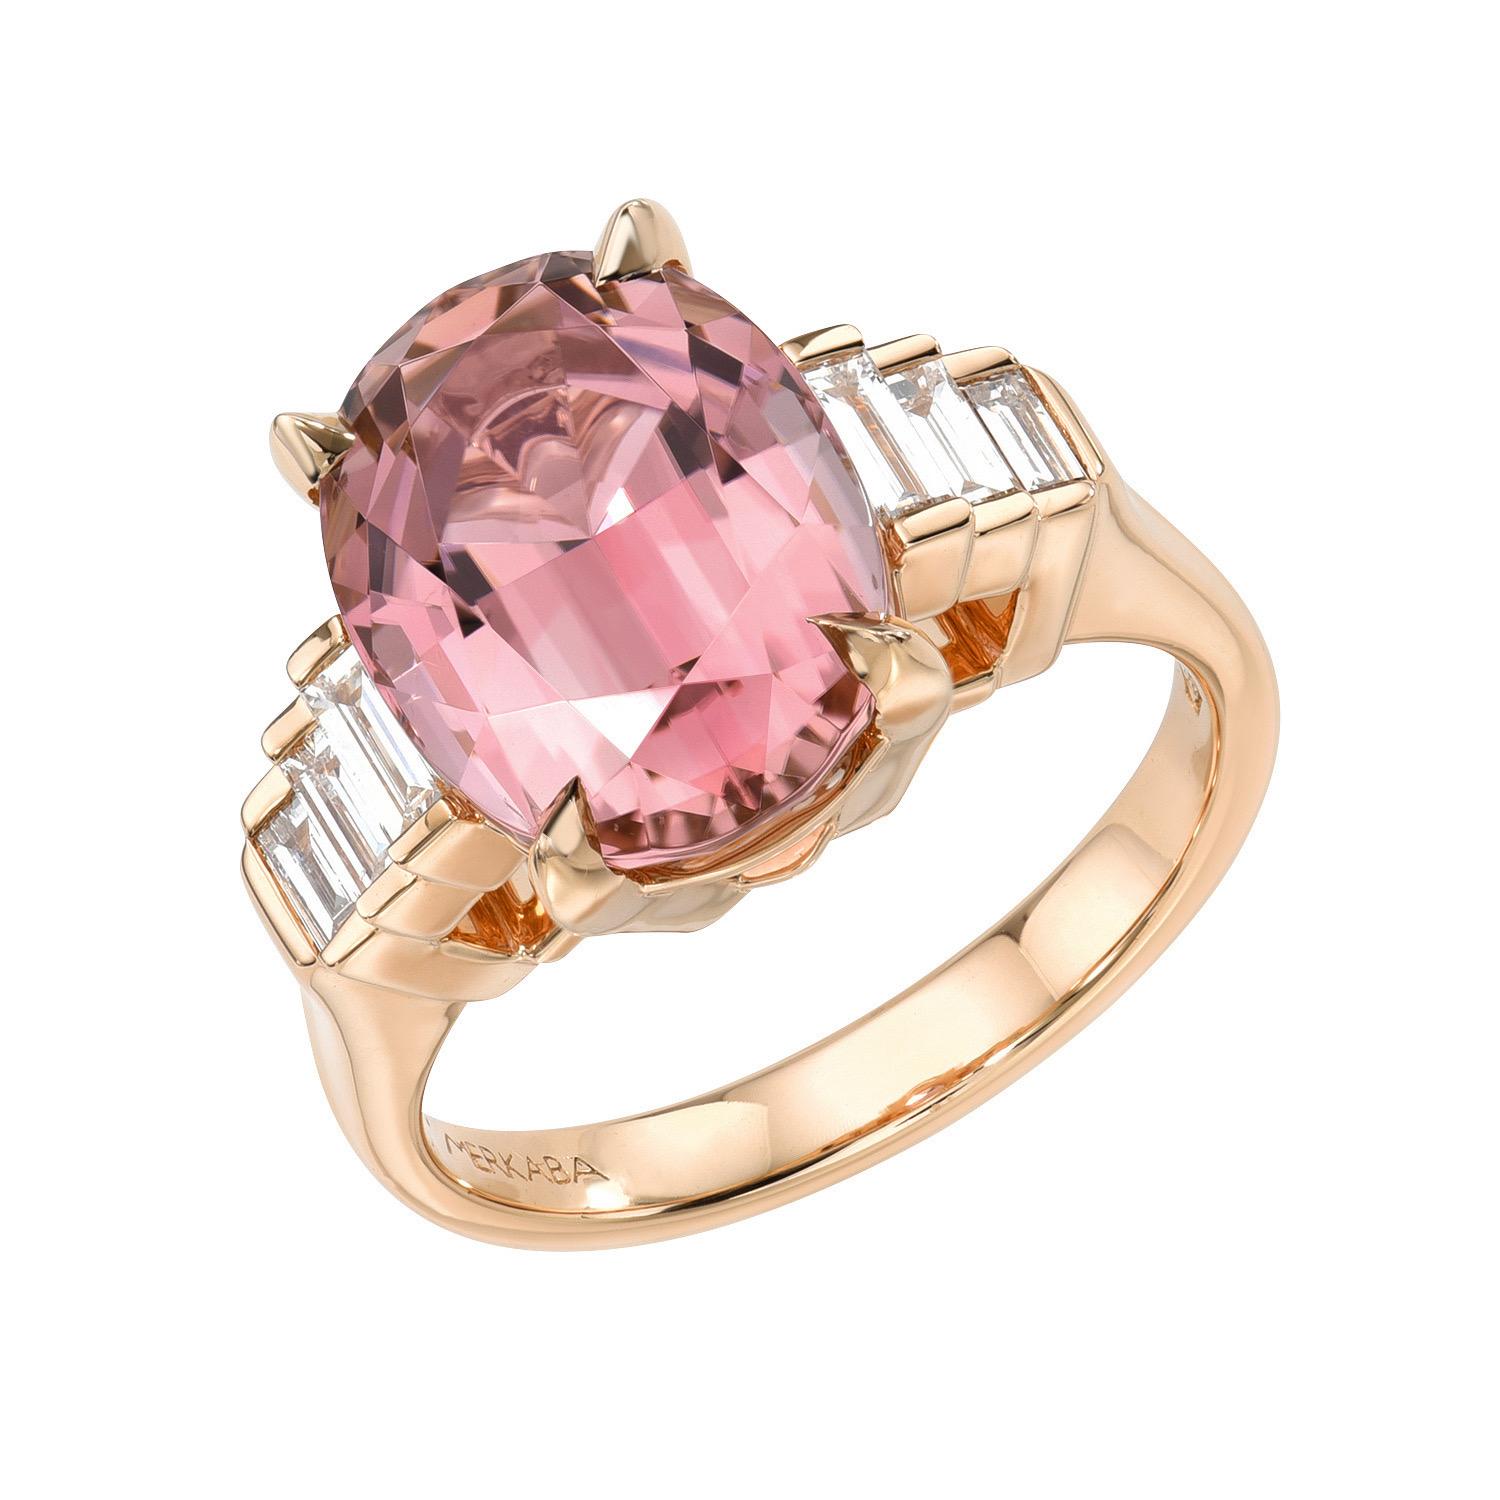 Superb 6.79 carat Pink Tourmaline oval, 18K rose gold ring, decorated with a total of 0.40 carat collection baguette diamonds.
Ring size 6.5. Resizing is complementary upon request.
Returns are accepted and paid by us within 7 days of